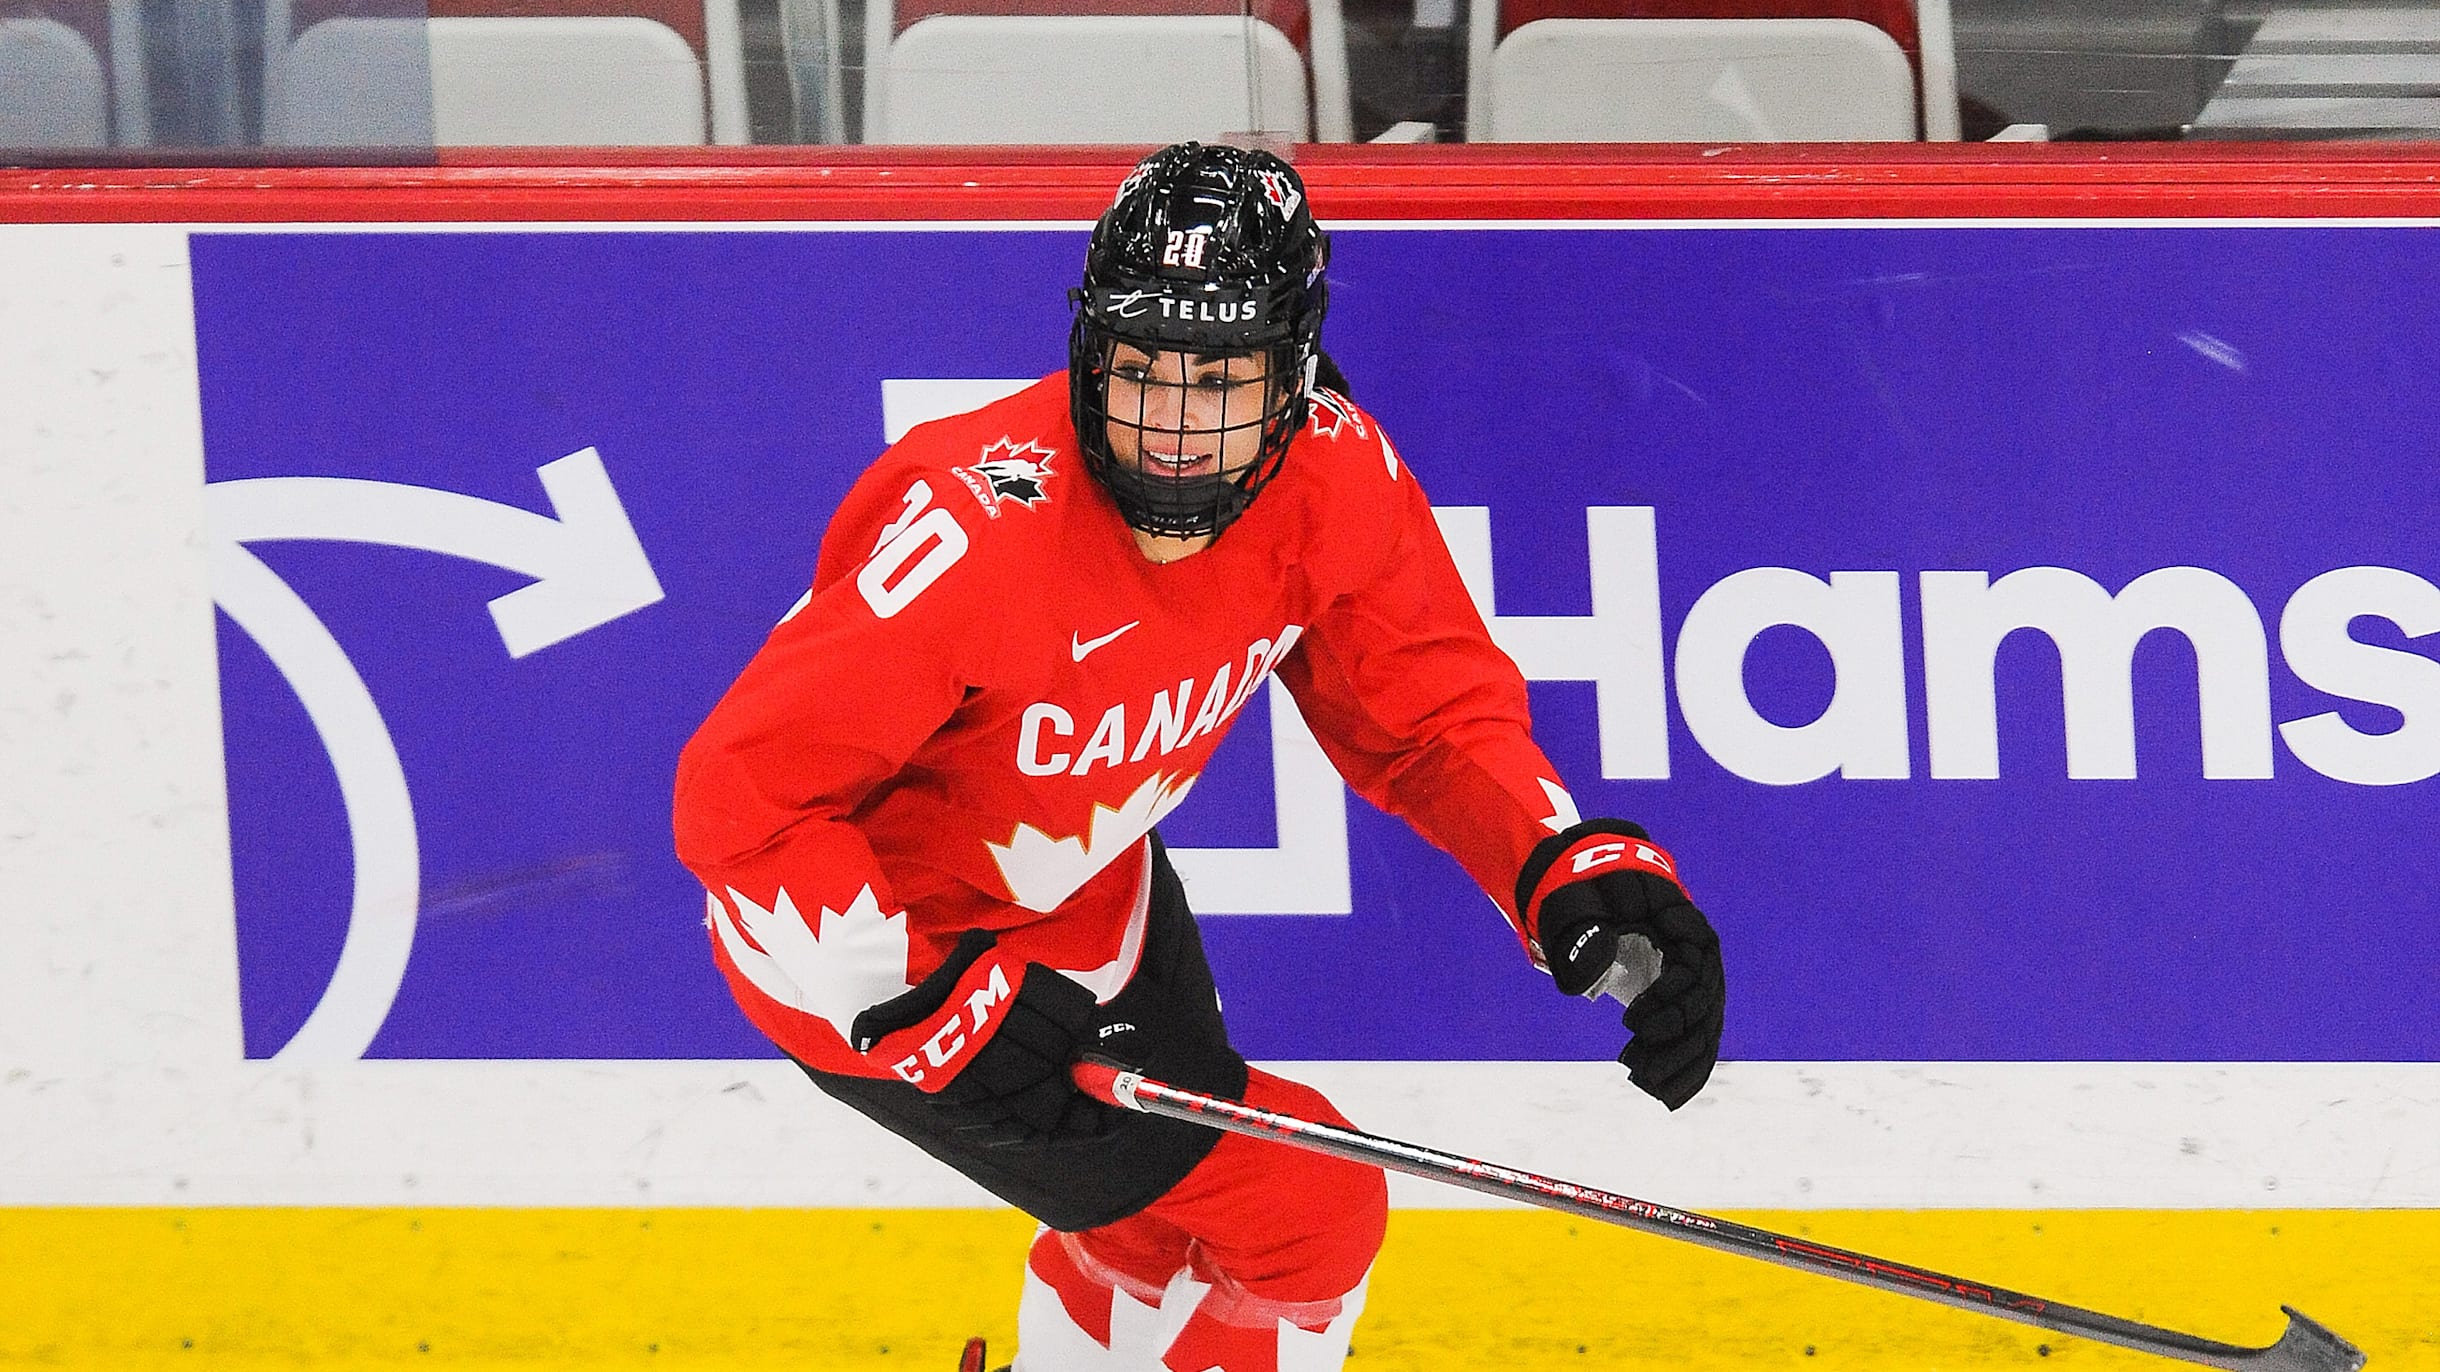 Sarah Nurse becomes the face of women's hockey with diverse